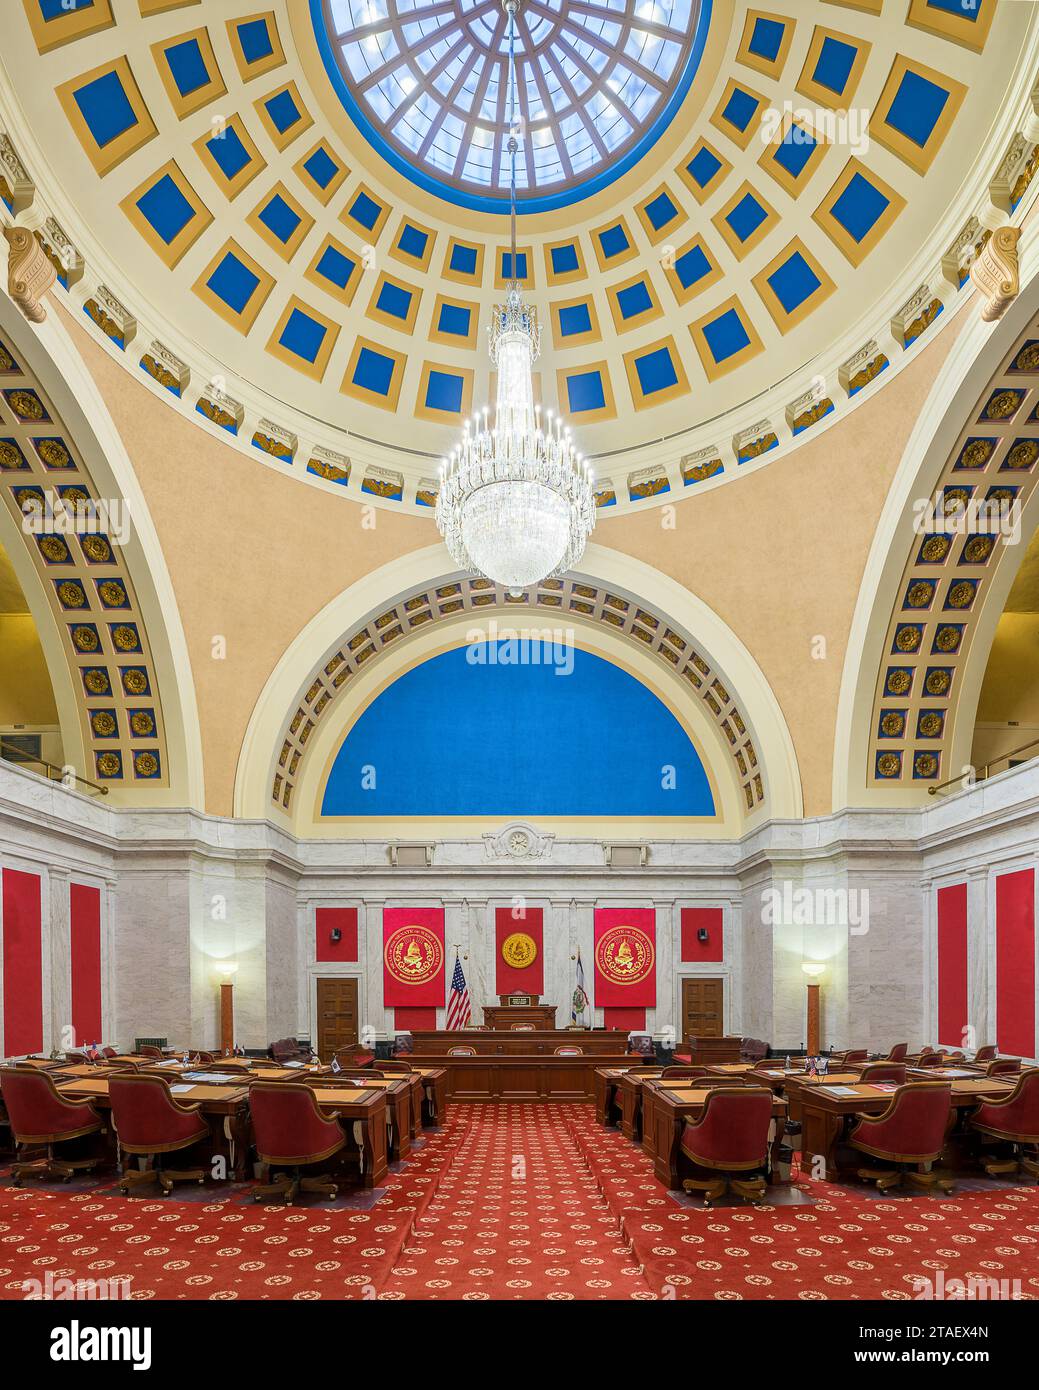 Senate chamber of the West Virginia State Capitol building at 1900 Kanawha Blvd E in Charleston, West Virginia Stock Photo